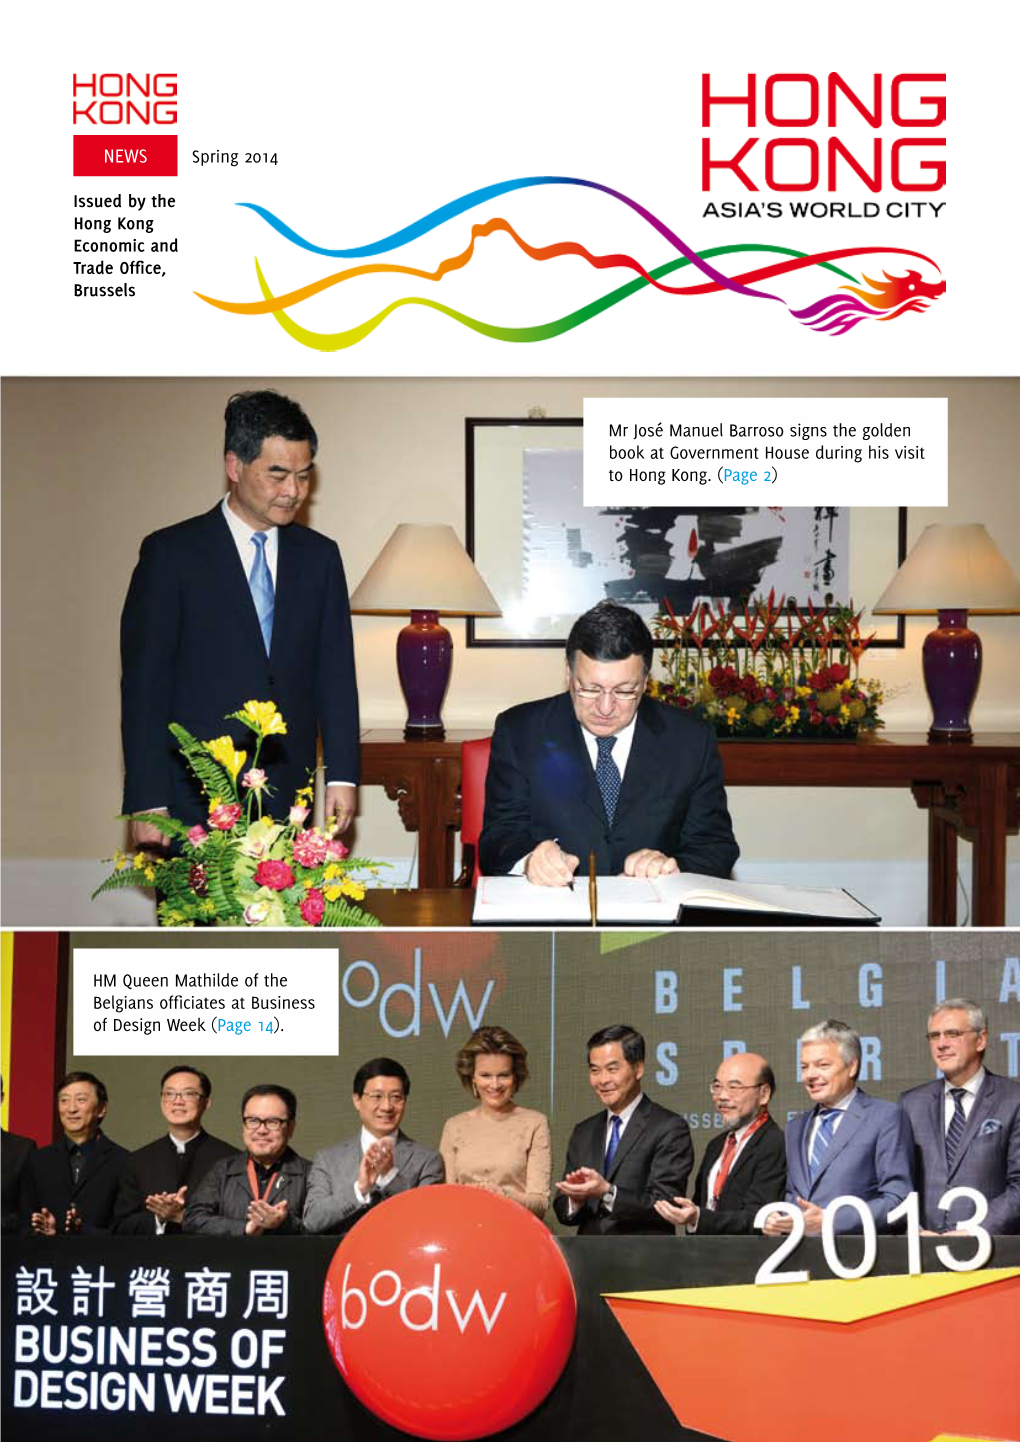 Spring 2014 Issued by the Hong Kong Economic and Trade Office